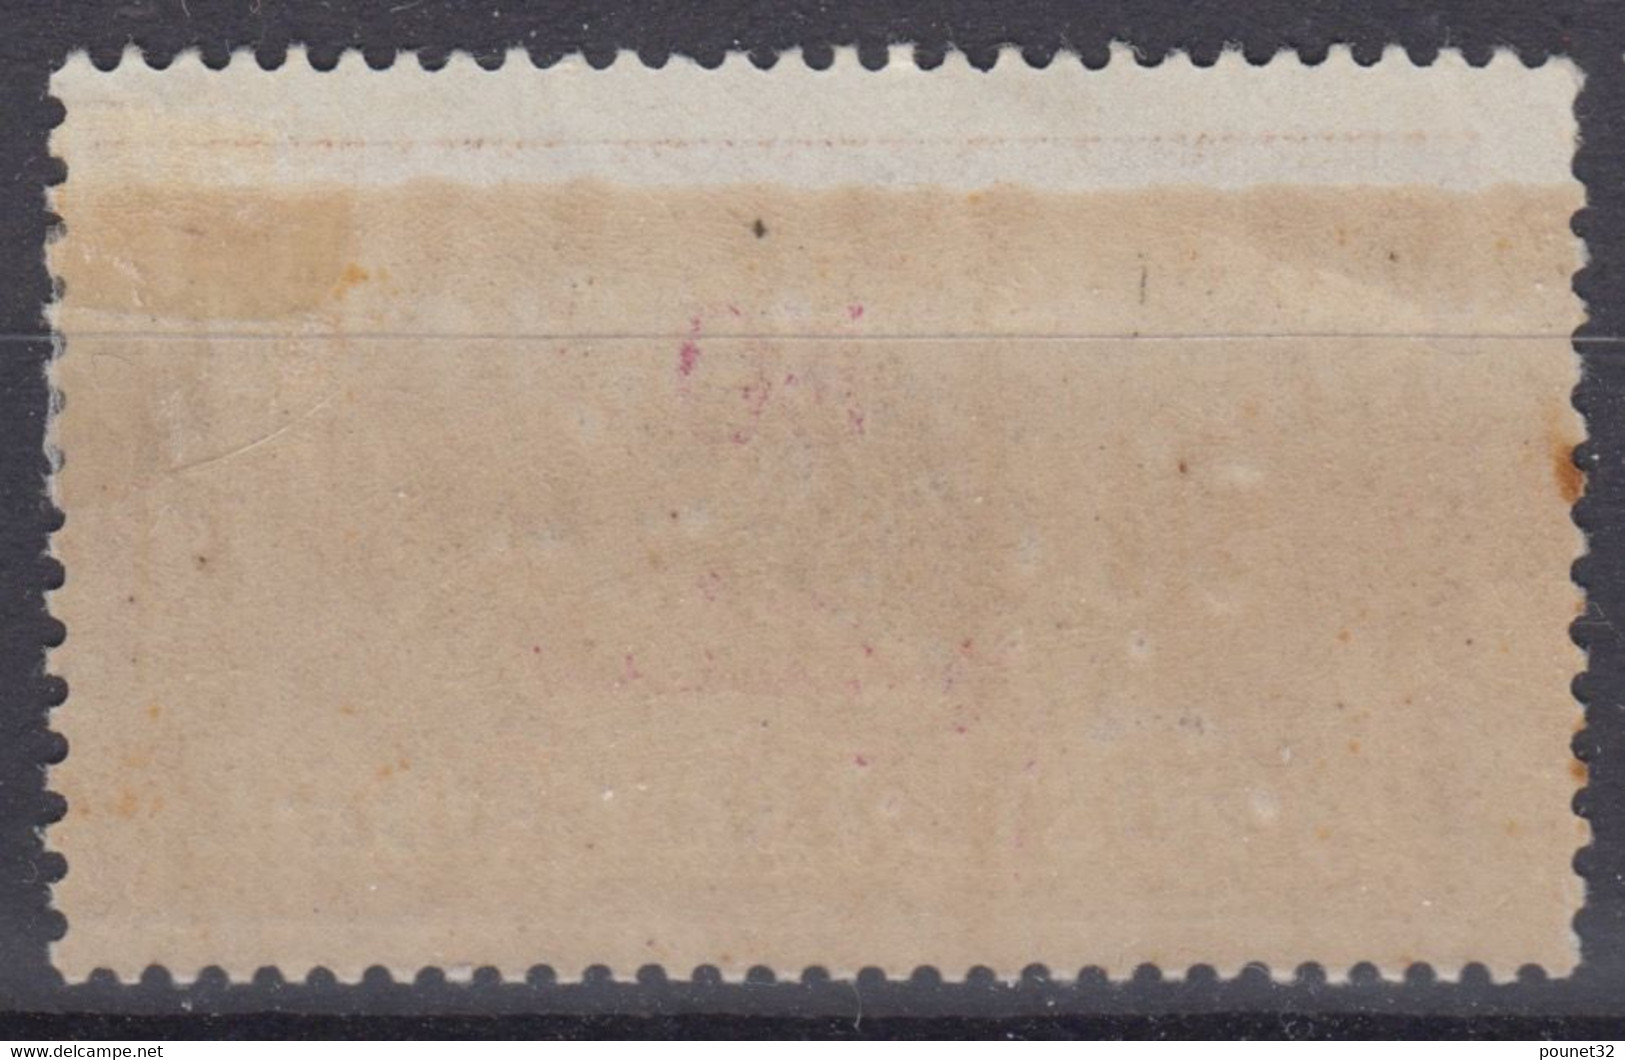 MAROC : 50c MERSON SURCHARGE N° 35 NEUF * GOMME AVEC CHARNIERE - Unused Stamps